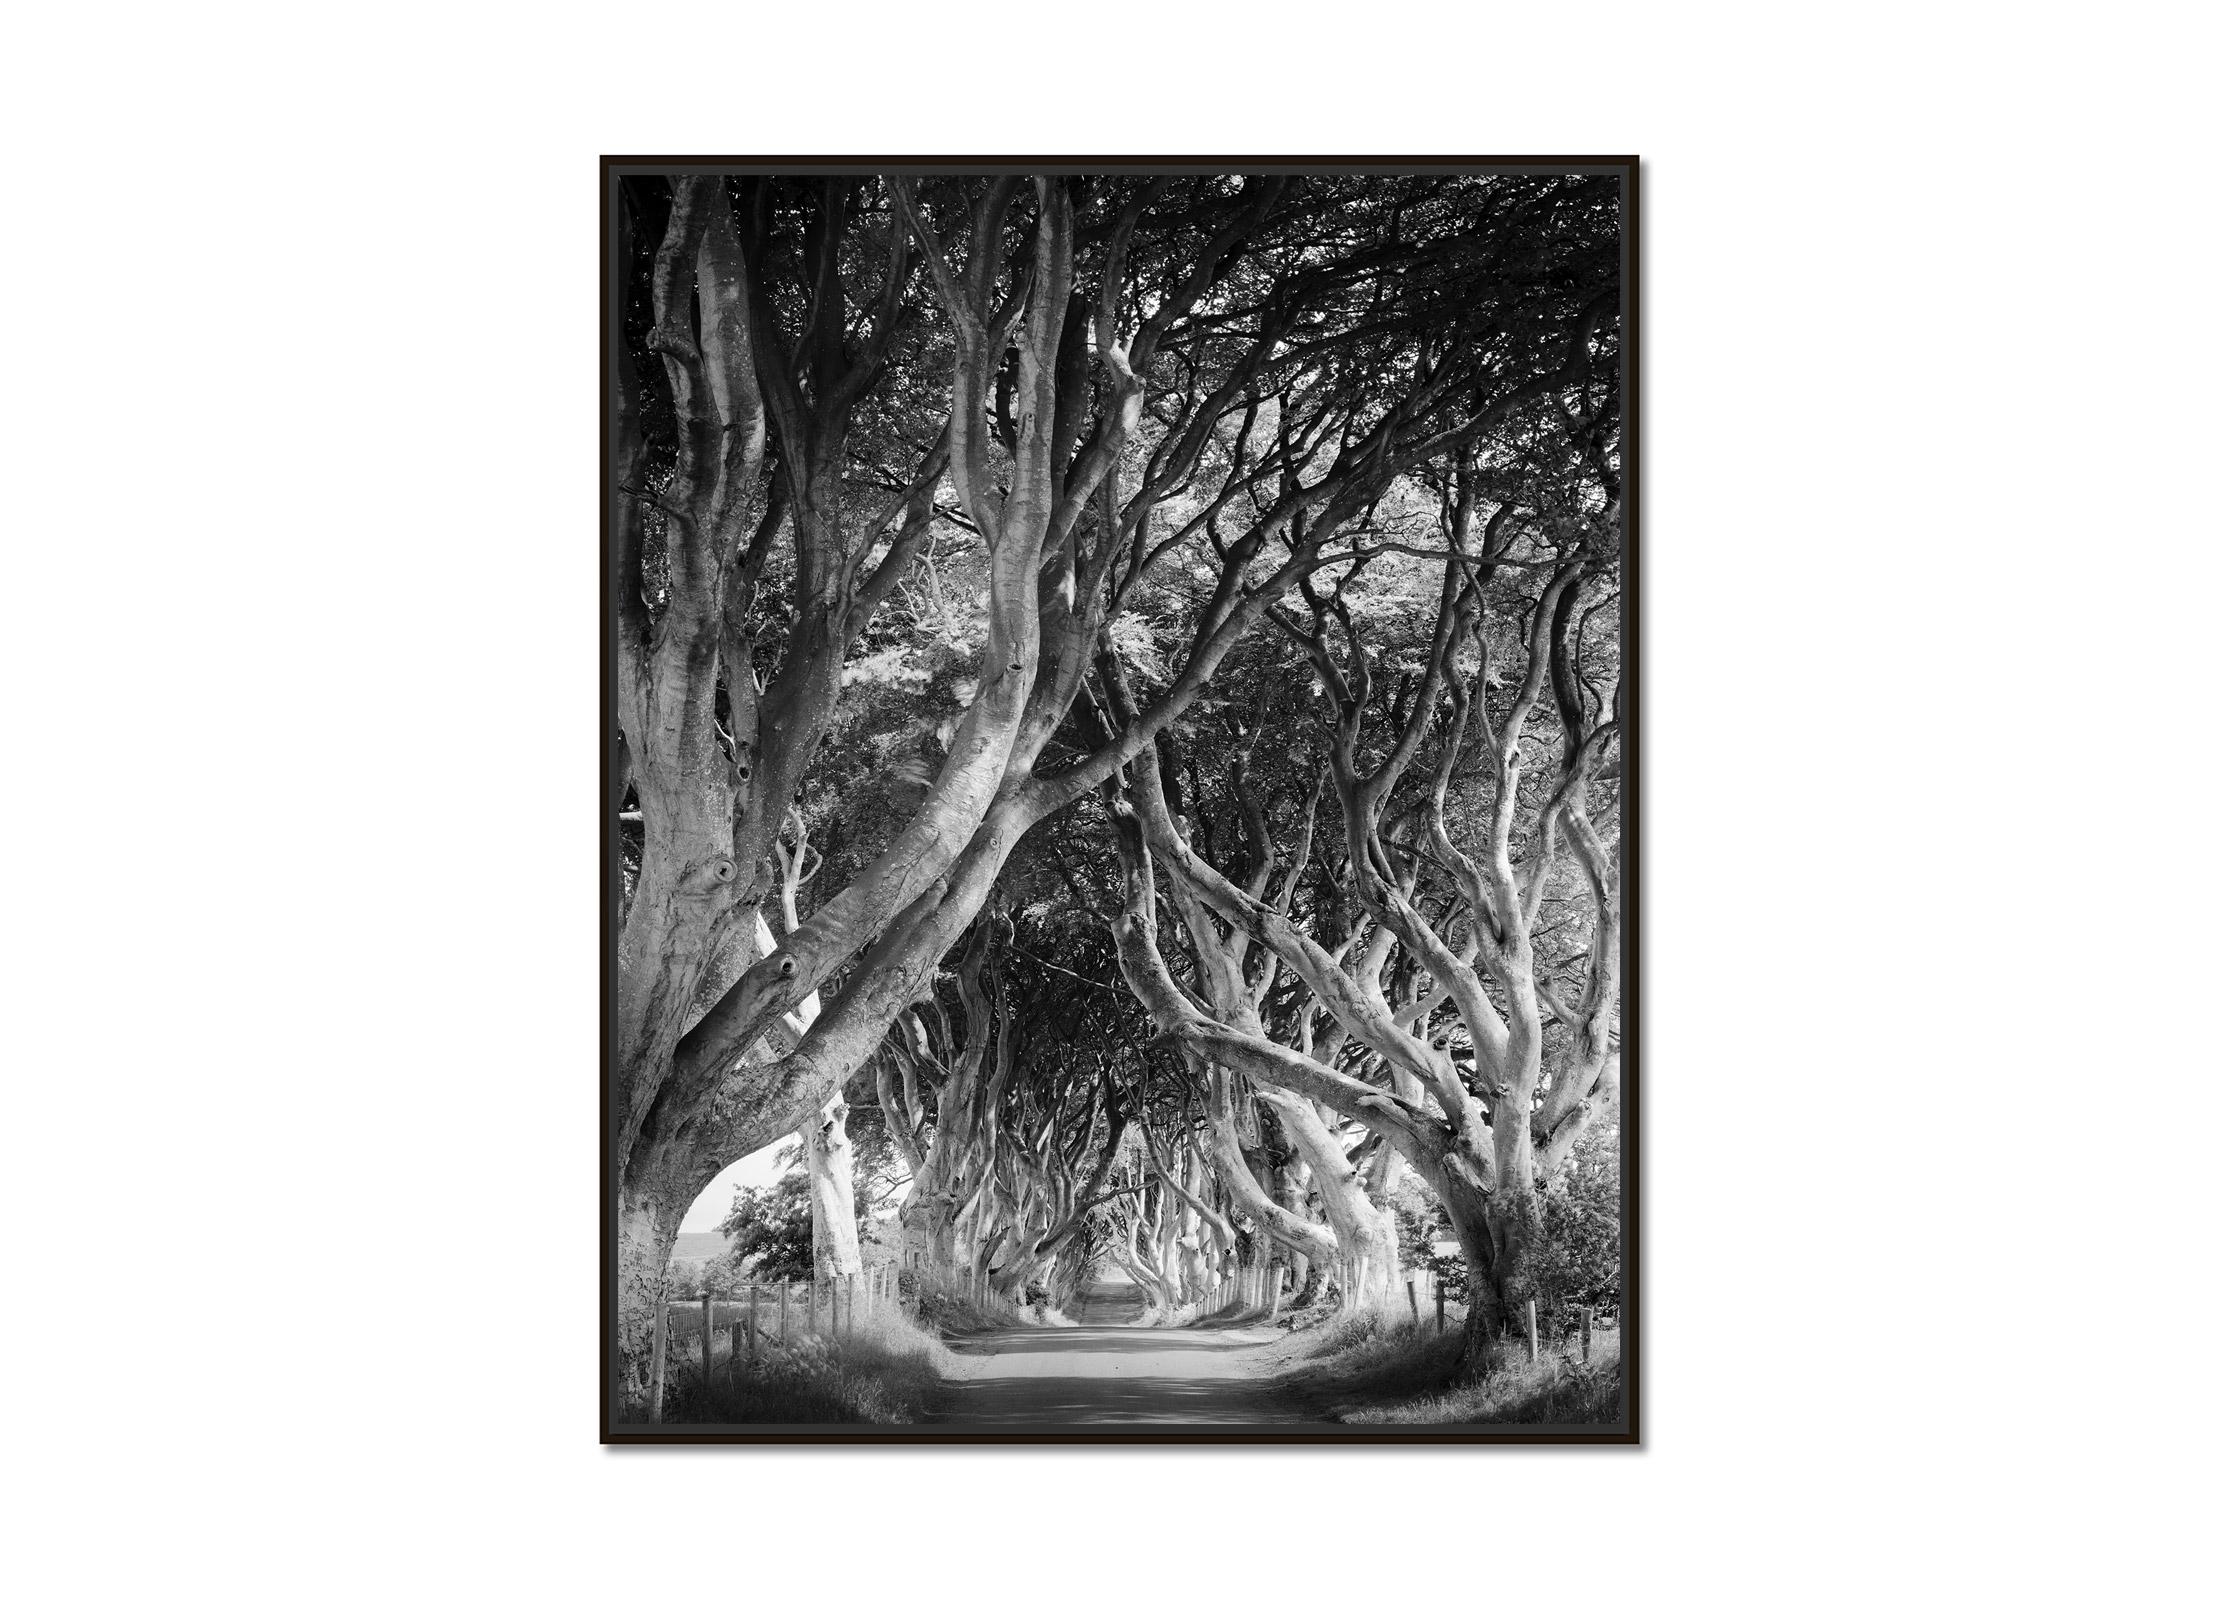 Dark Hedges, tree avenue, mystical forest, black & white photography, landscape - Photograph by Gerald Berghammer